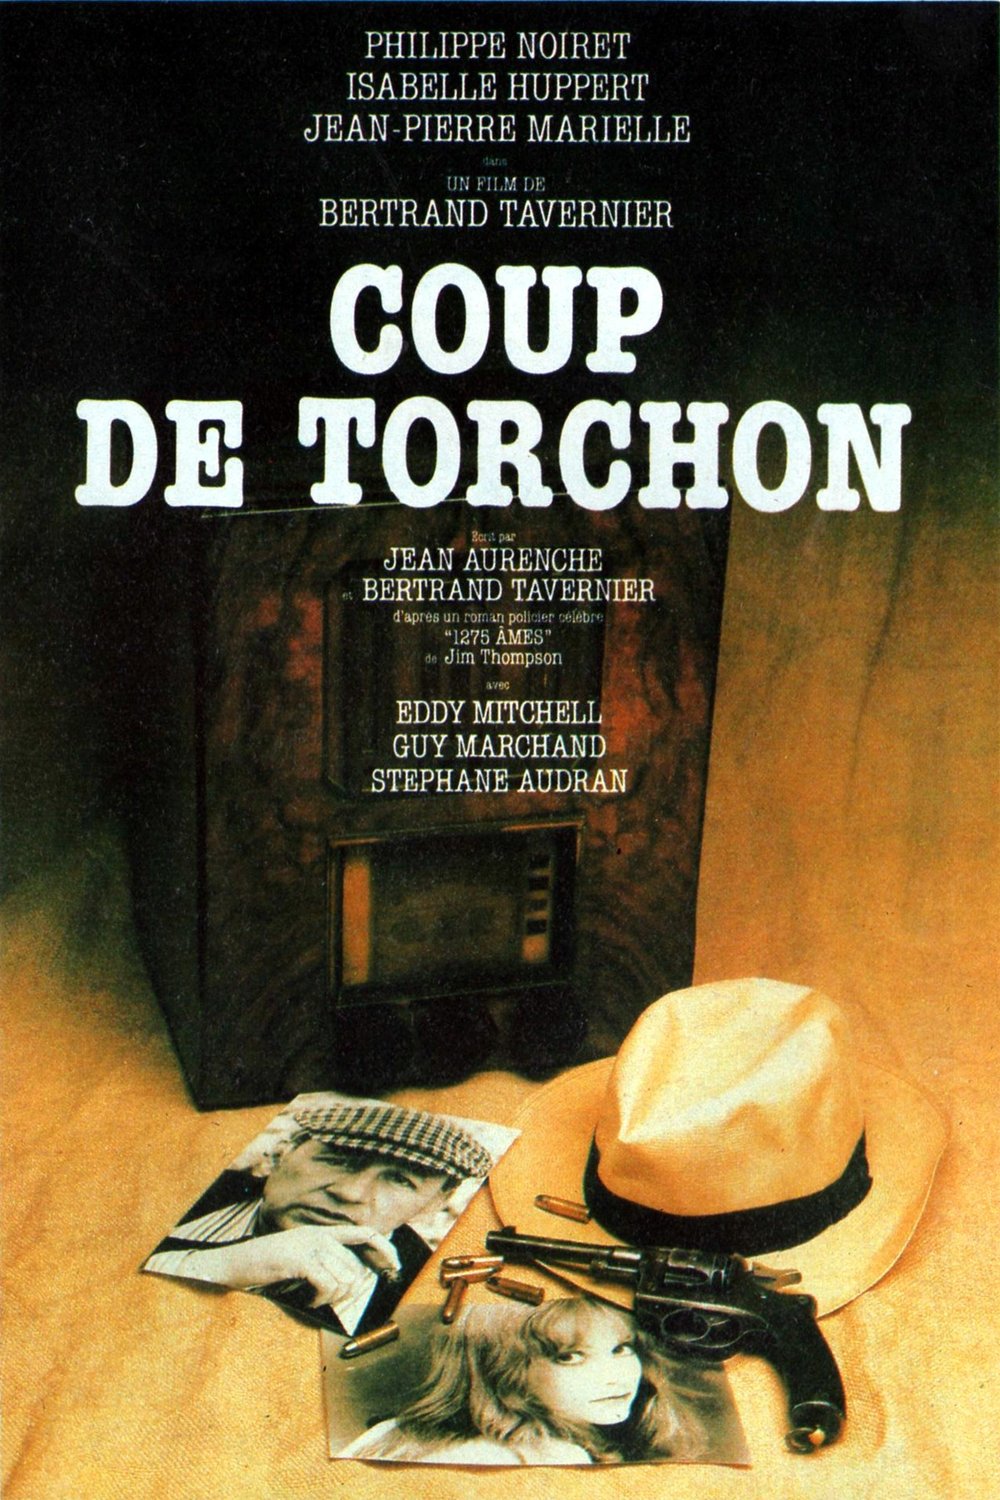 Poster of the movie Coup de torchon